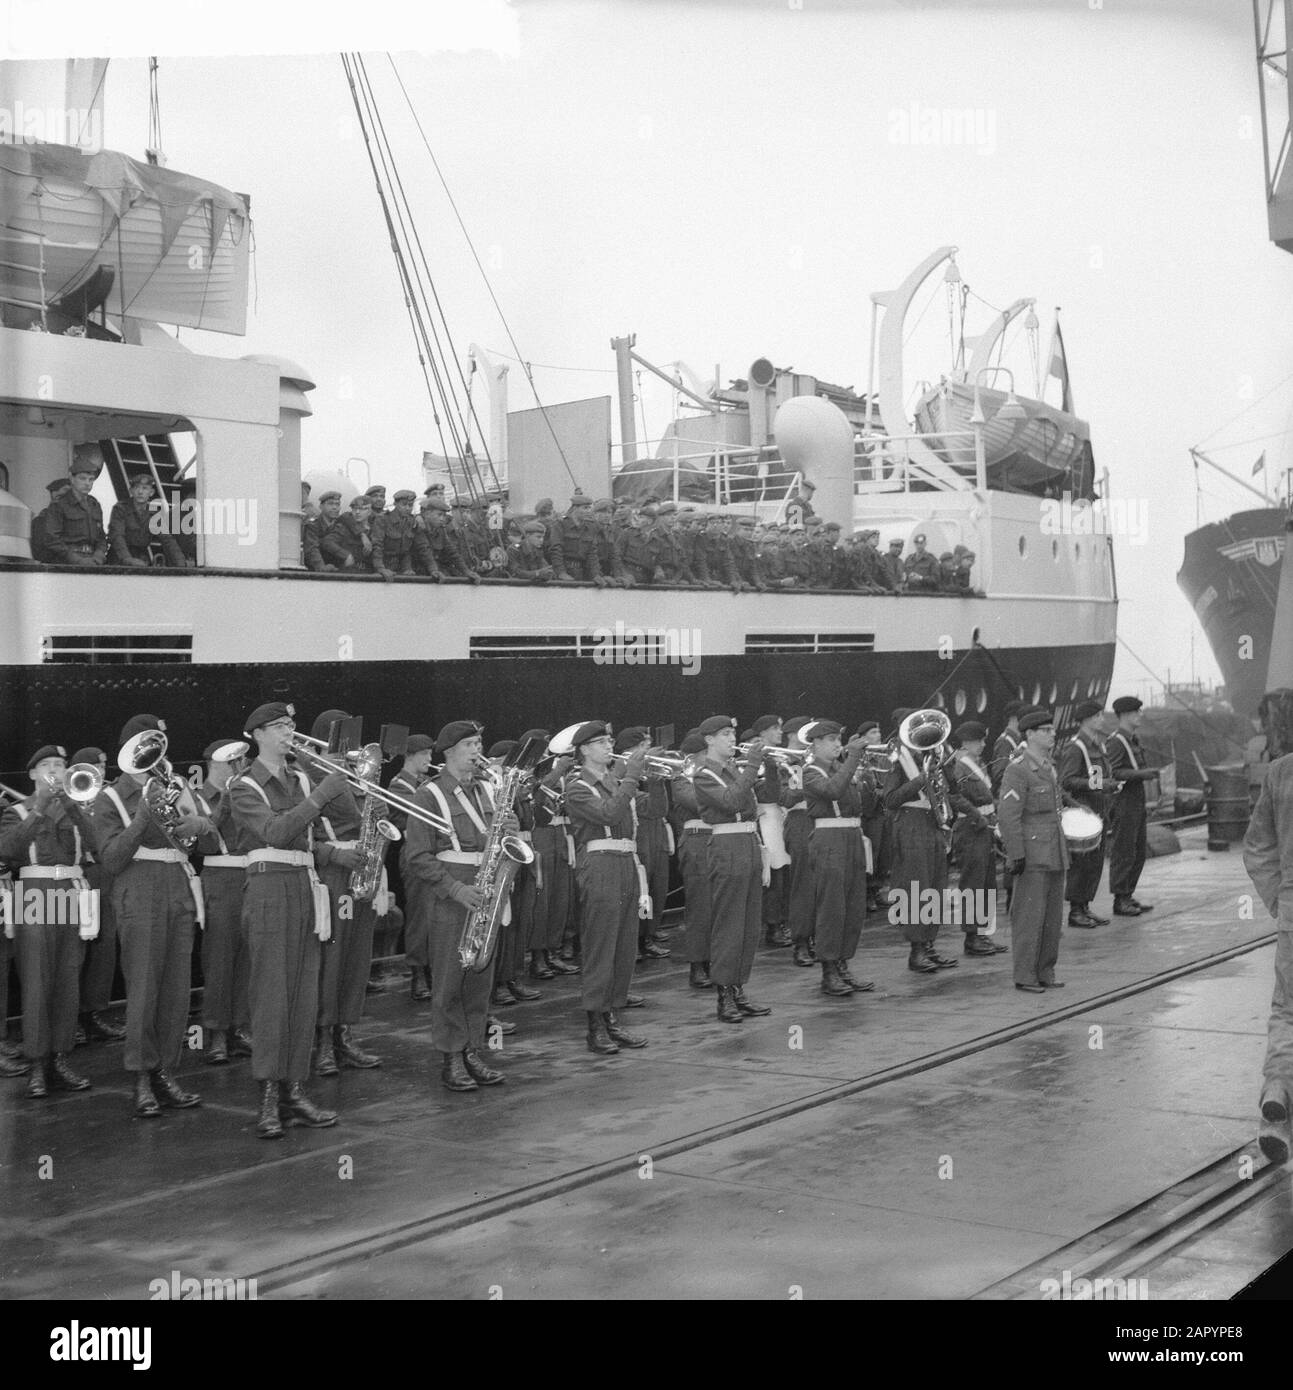 Departure first detachment of the first Surinamese company per Ms. Willemstad to Suriname, trompettercorps der cavalry plays at farewell Date: 13 January 1961 Location: Suriname Keywords: FEED, CAVALERIE, COMPAGNIES, DETACHEMENTS Institution name: MS Willemstad Stock Photo